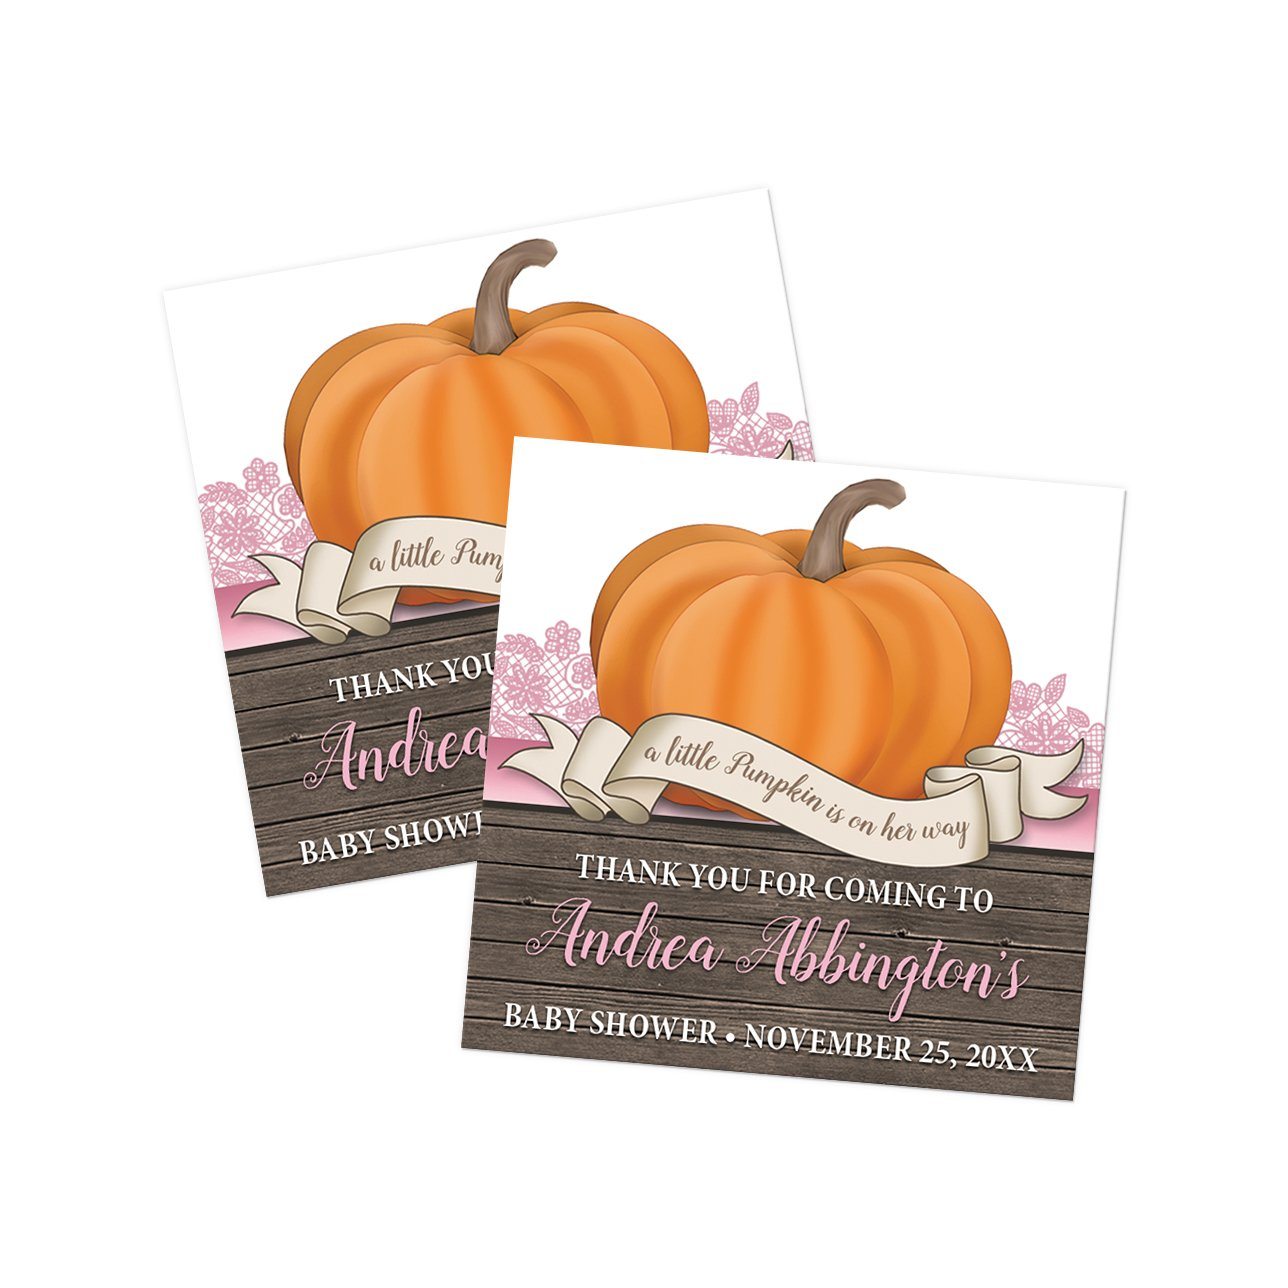 Rustic Orange Pink Pumpkin Thank You Stickers at Artistically Invited